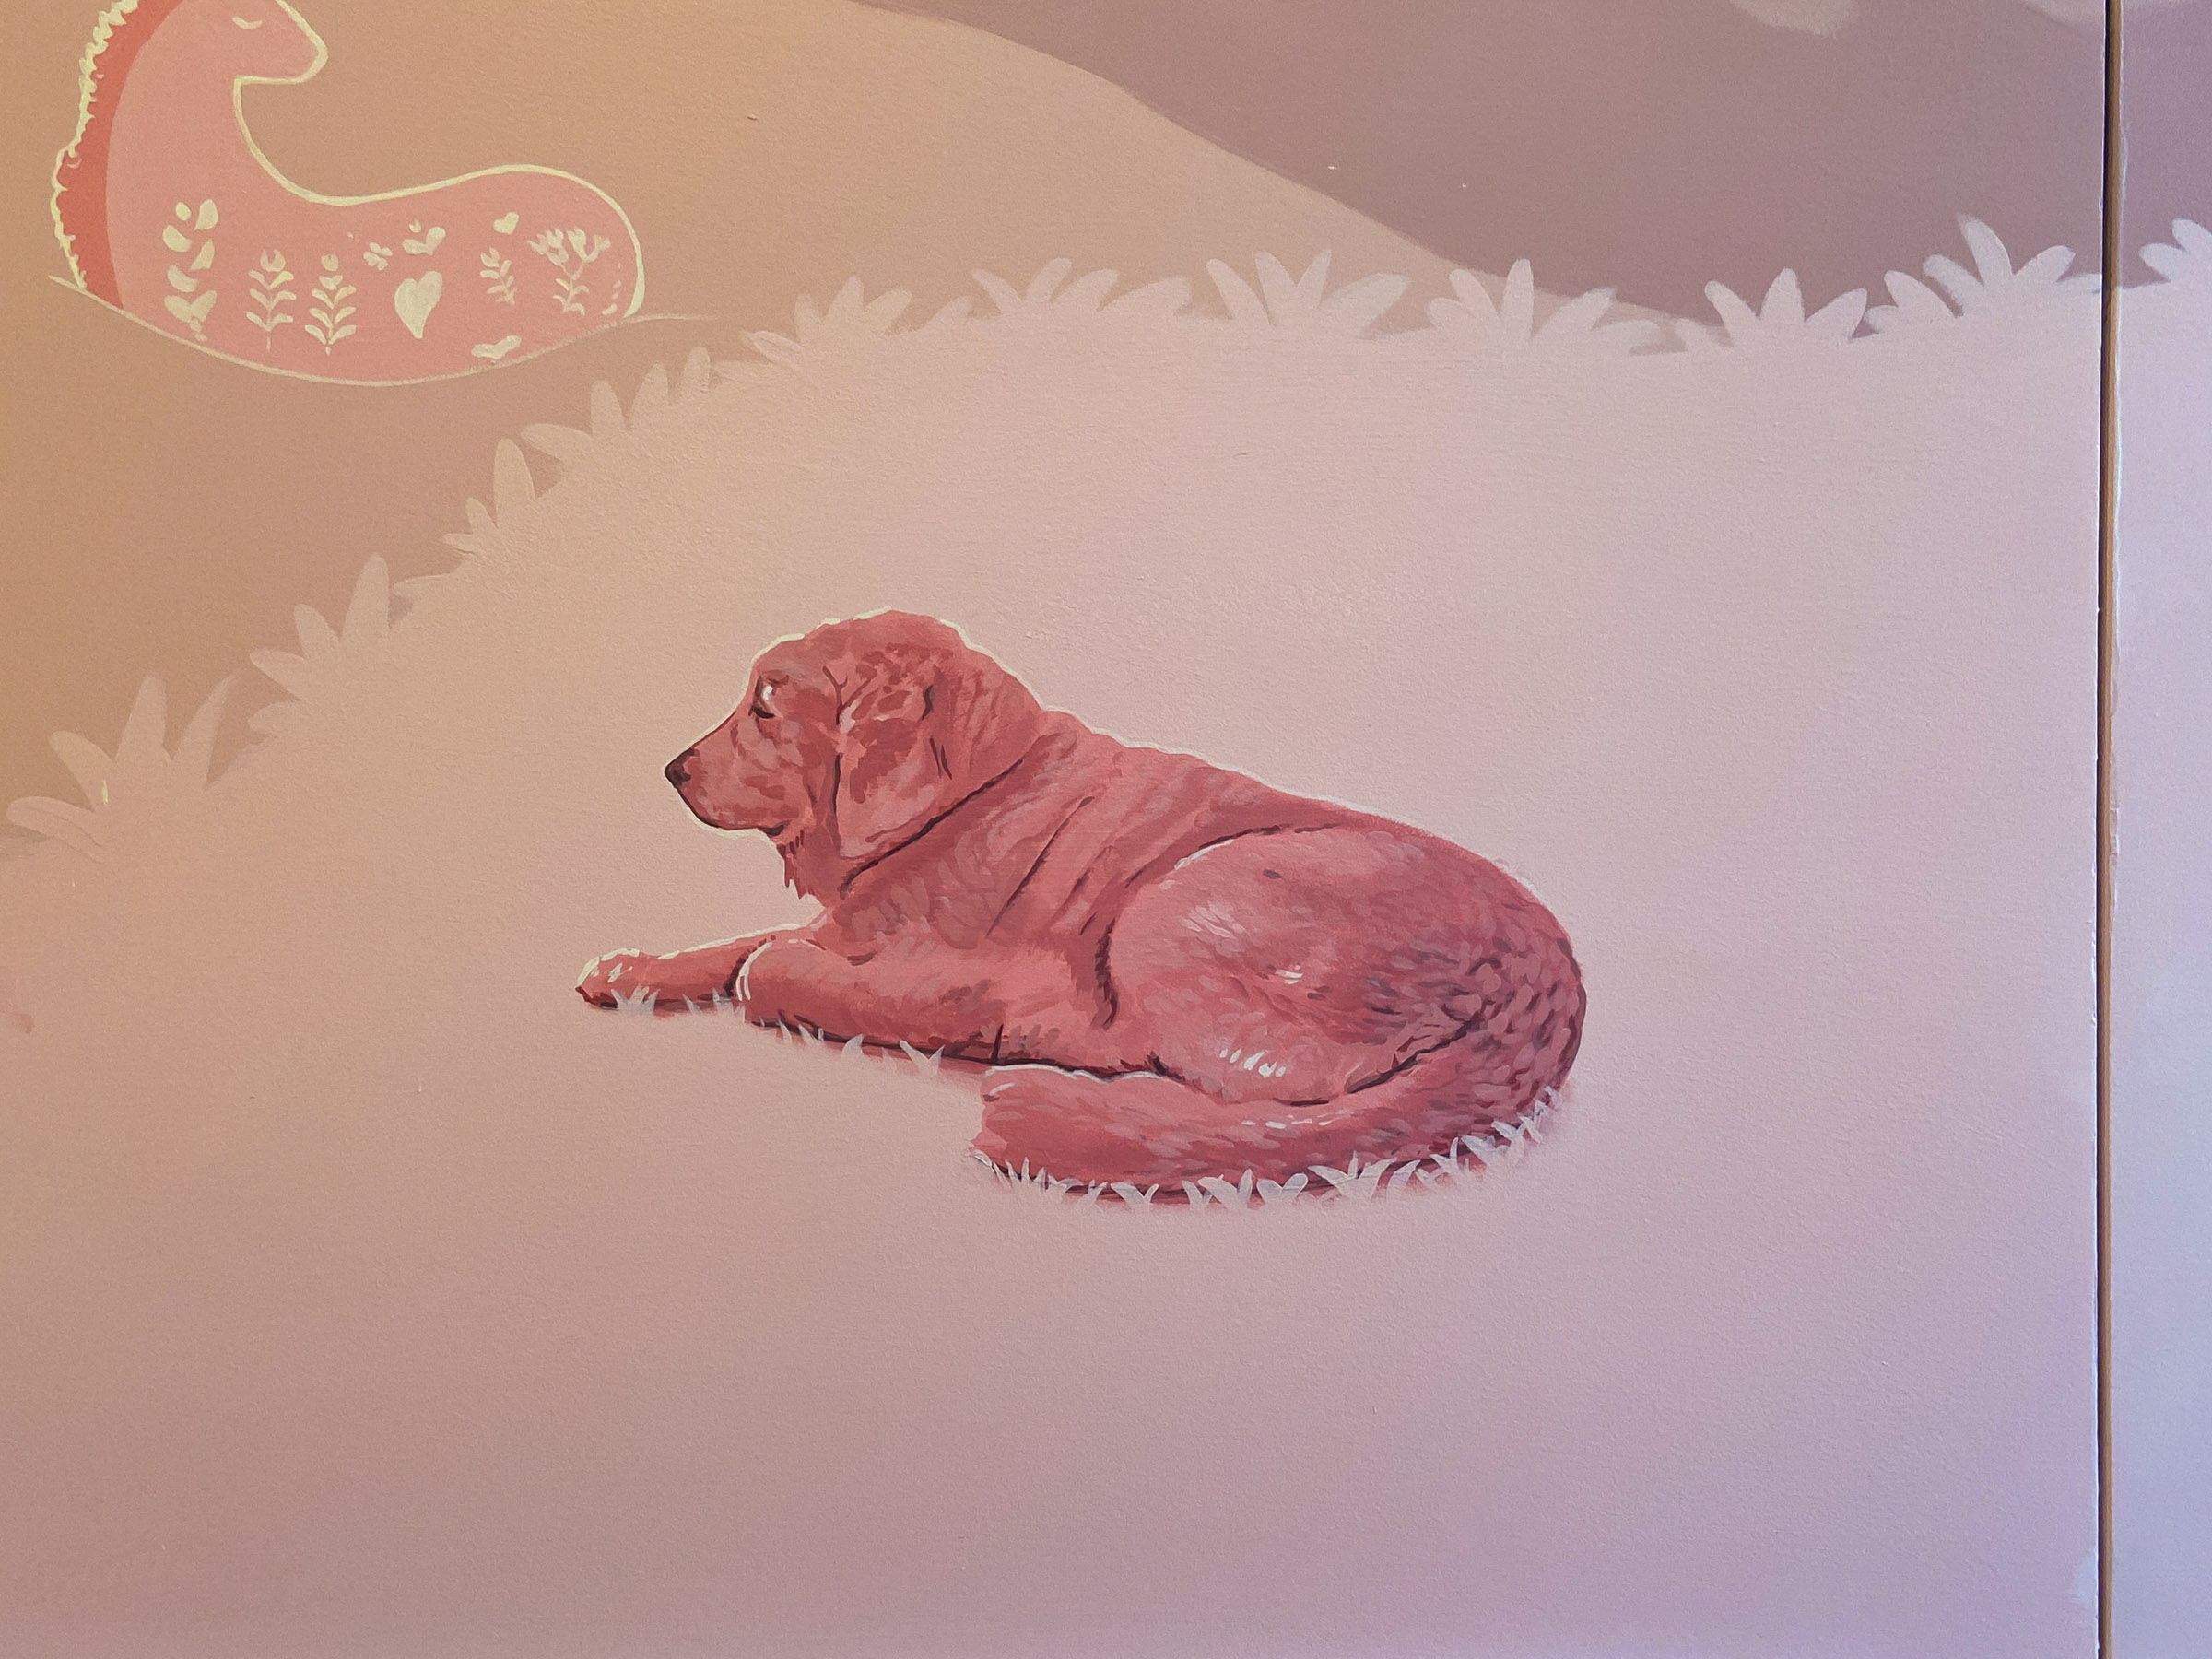 The client's pretty dog painted on the bedroom Mural